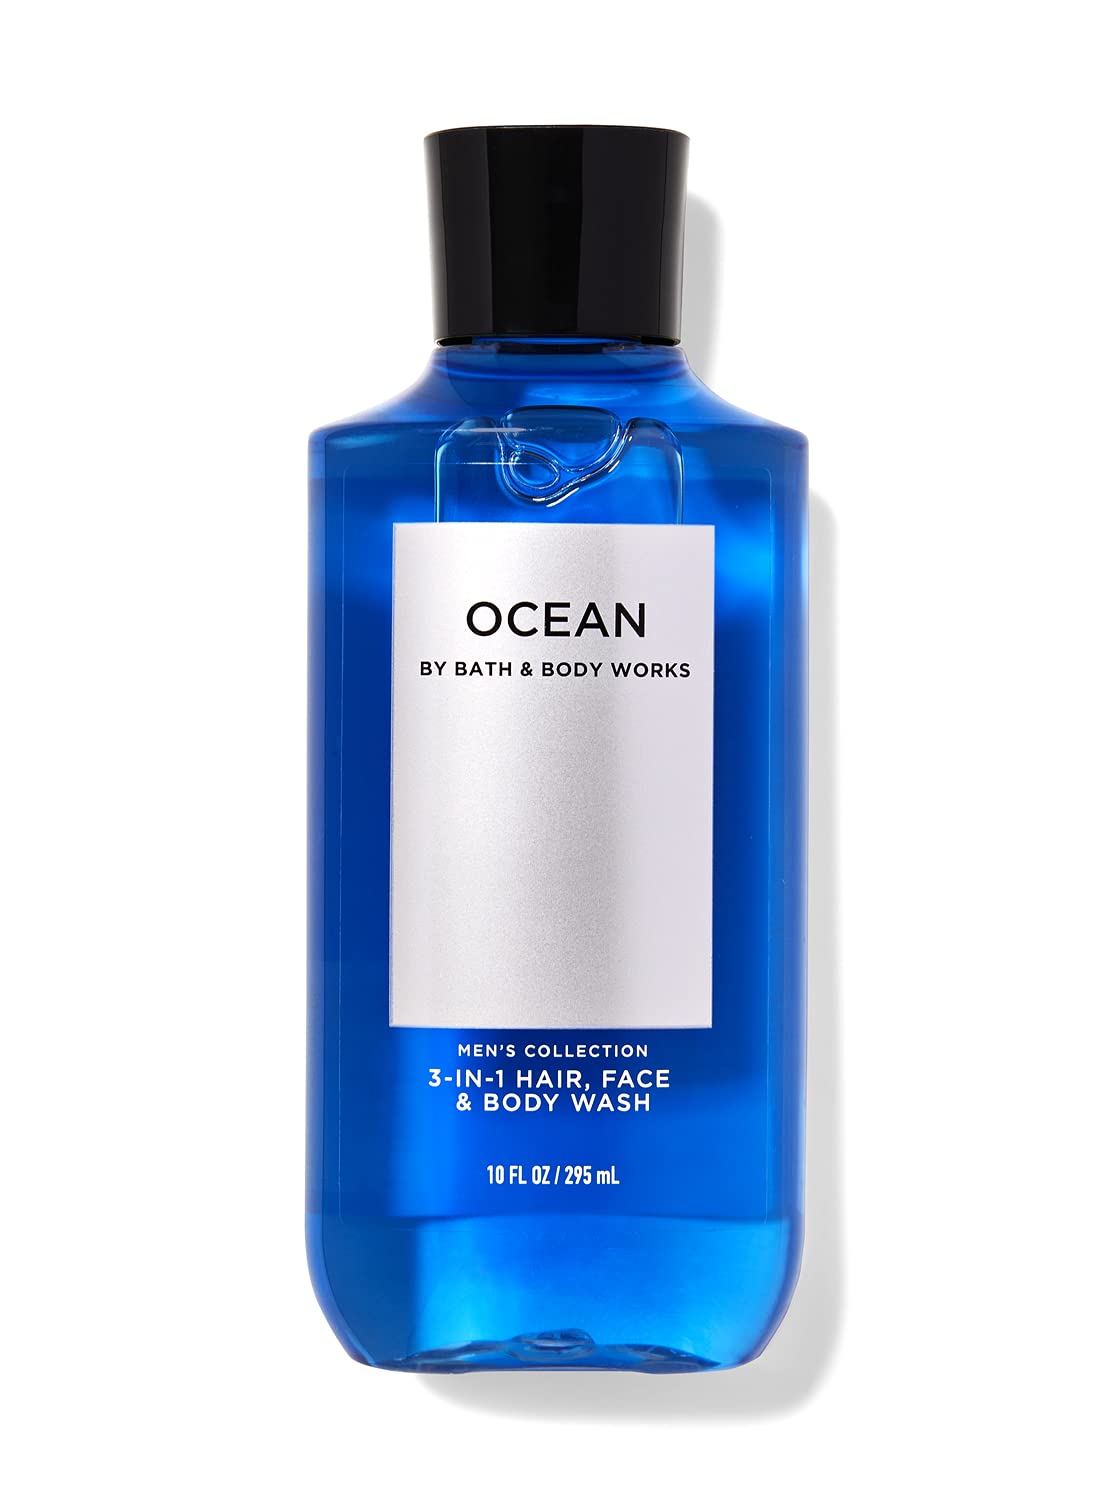 OCEAN 3-in-1 Hair, Face & Body Wash by Bath and Body Works